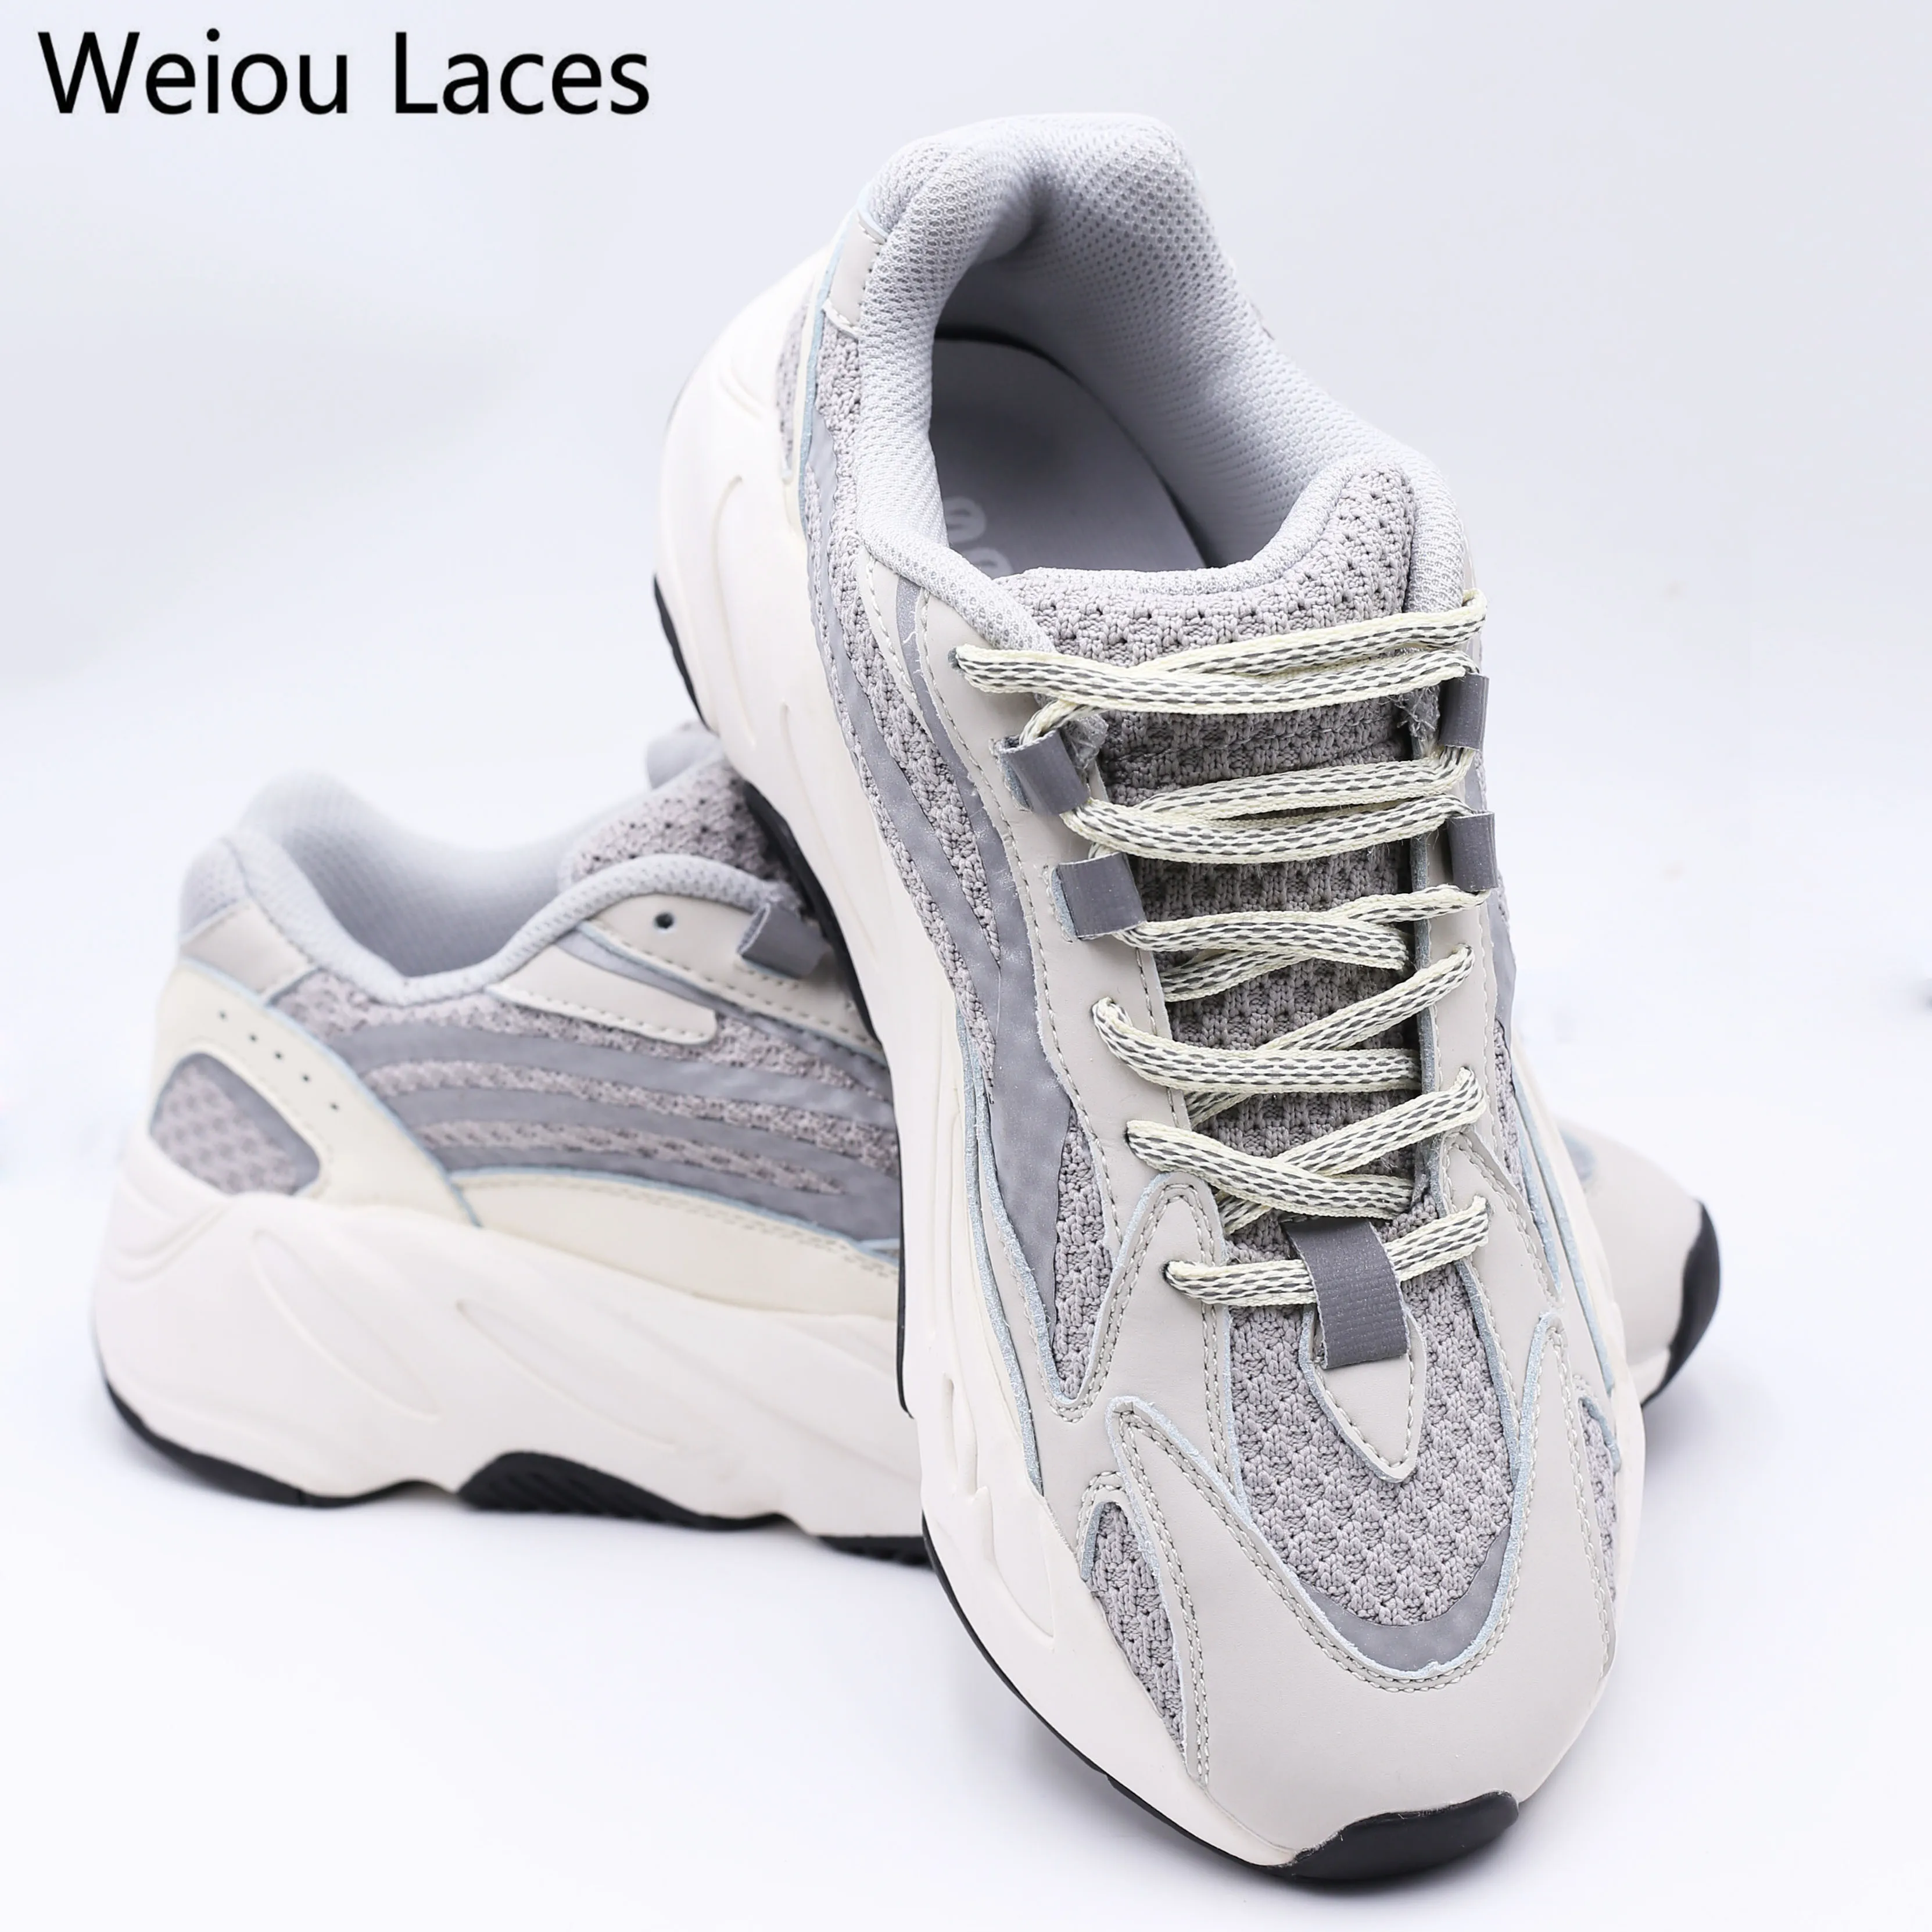 

Weiou company Oval Rope Laces 3M Reflective Shoelace Highlight Sneakers Safety Running Shoestrings, 3m grey+polyester color